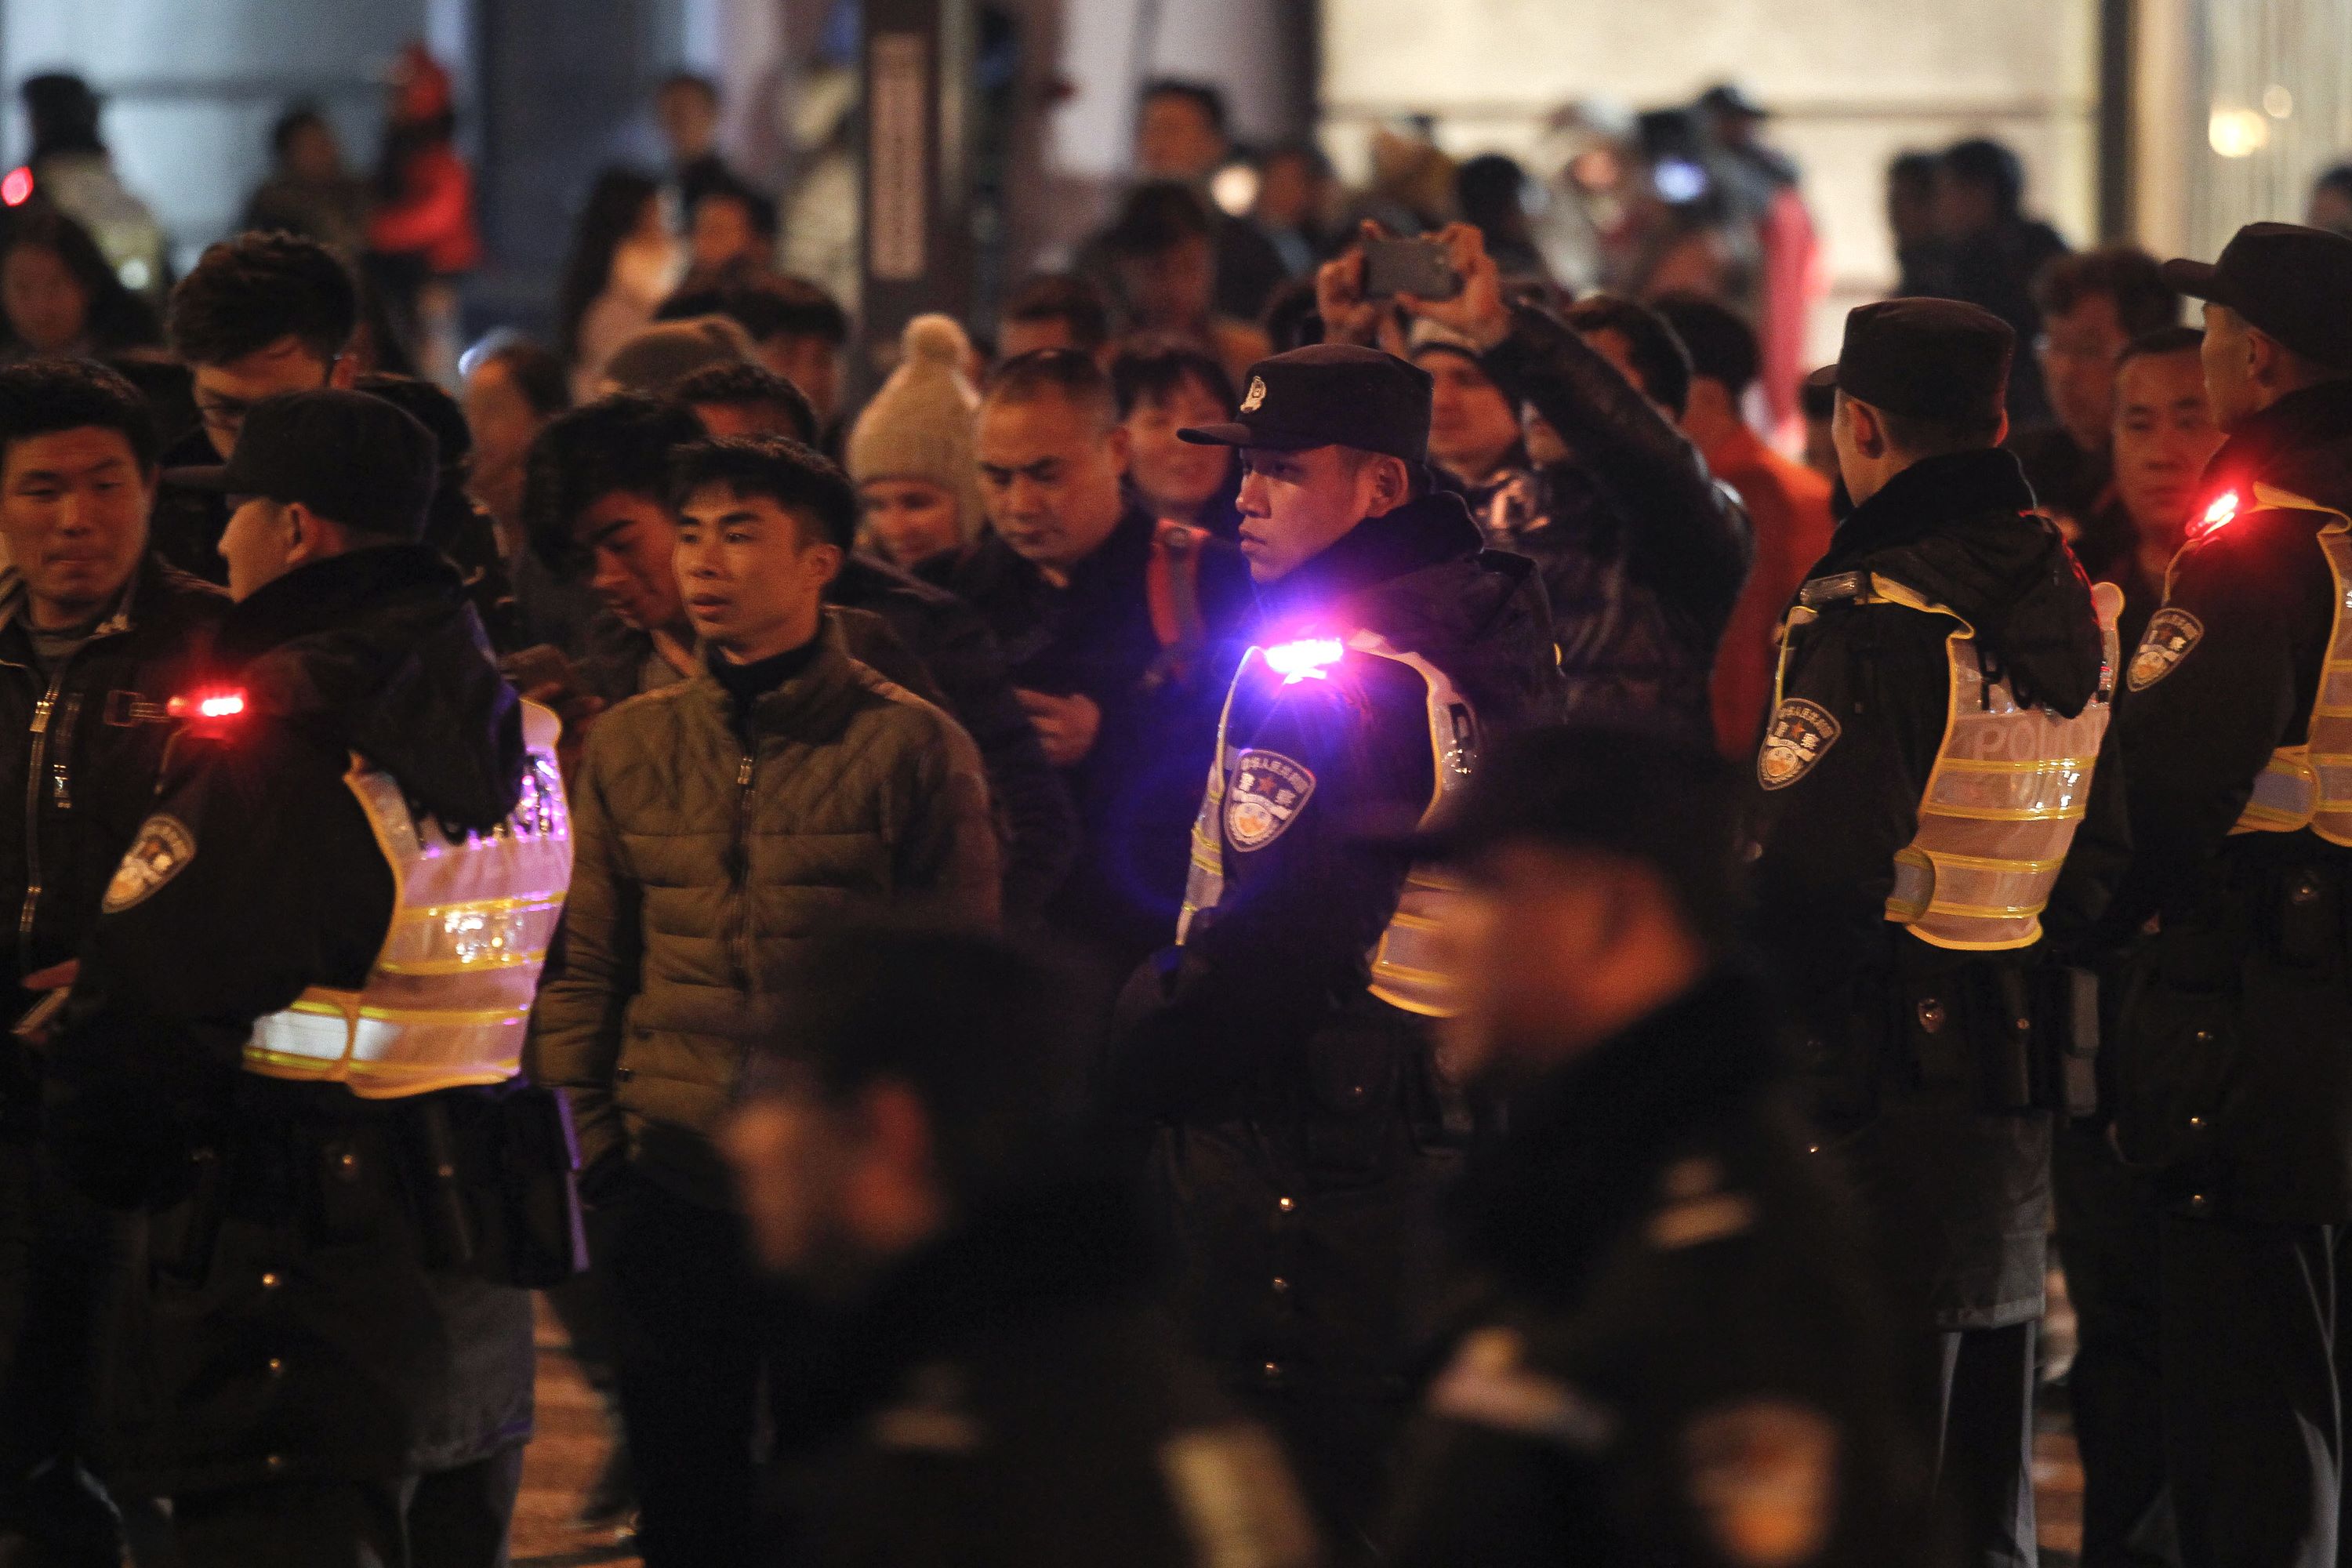 Security personnel stand on patrol on New Year's eve on the historic riverfront, known as "the Bund", in Shanghai on December 31, 2015. China's commercial hub Shanghai stepped up security along its famed waterfront on December 31, seeking to prevent the crowds that caused a crush which killed 36 people on New Year's Eve a year ago. CHINA OUT AFP PHOTO